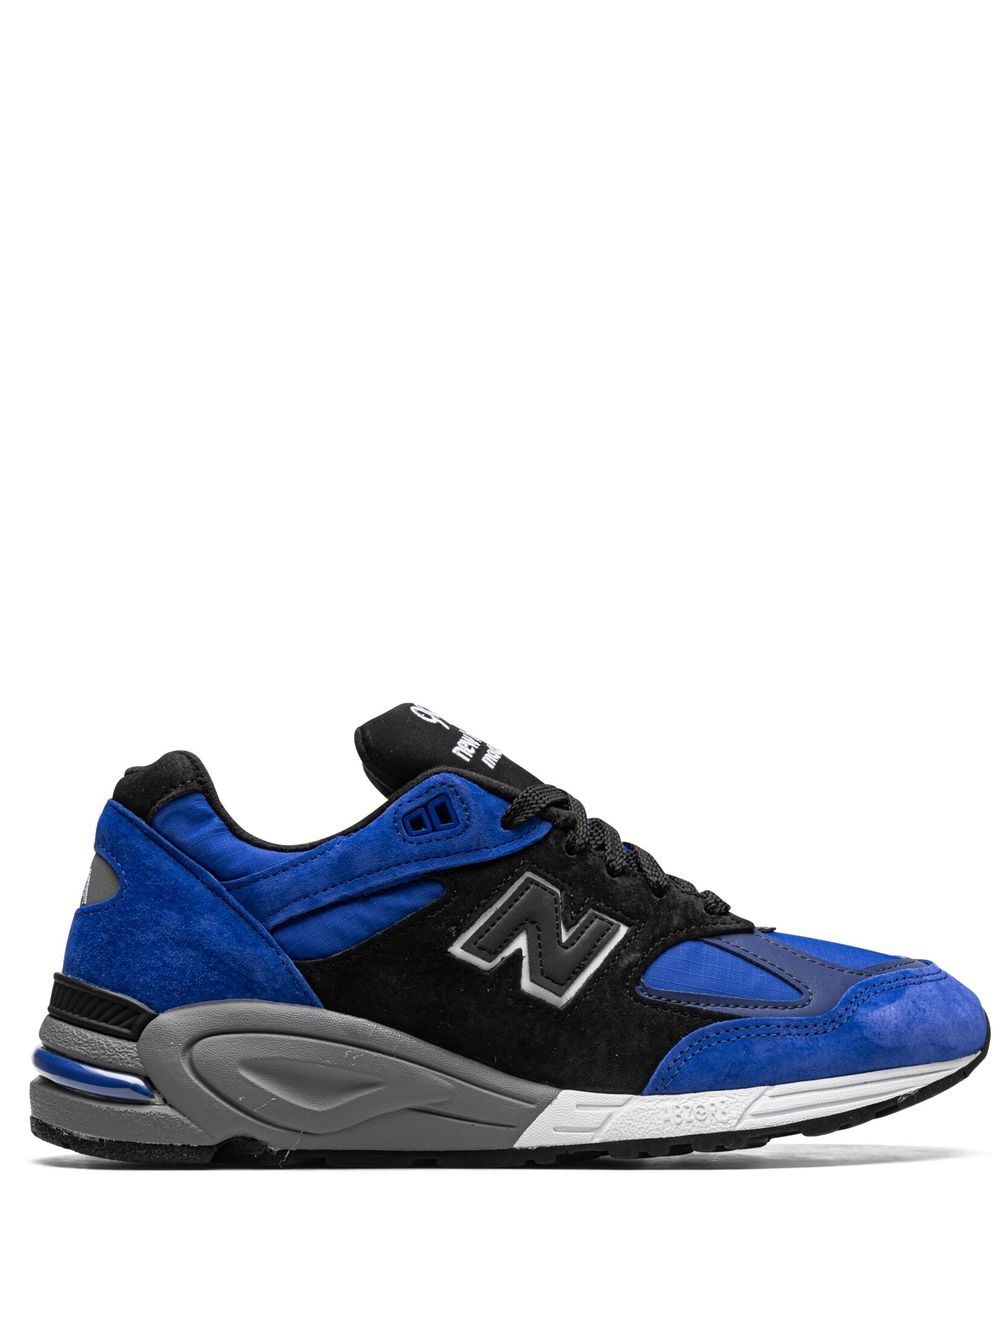 New Balance 990v2 sneakers - Blue